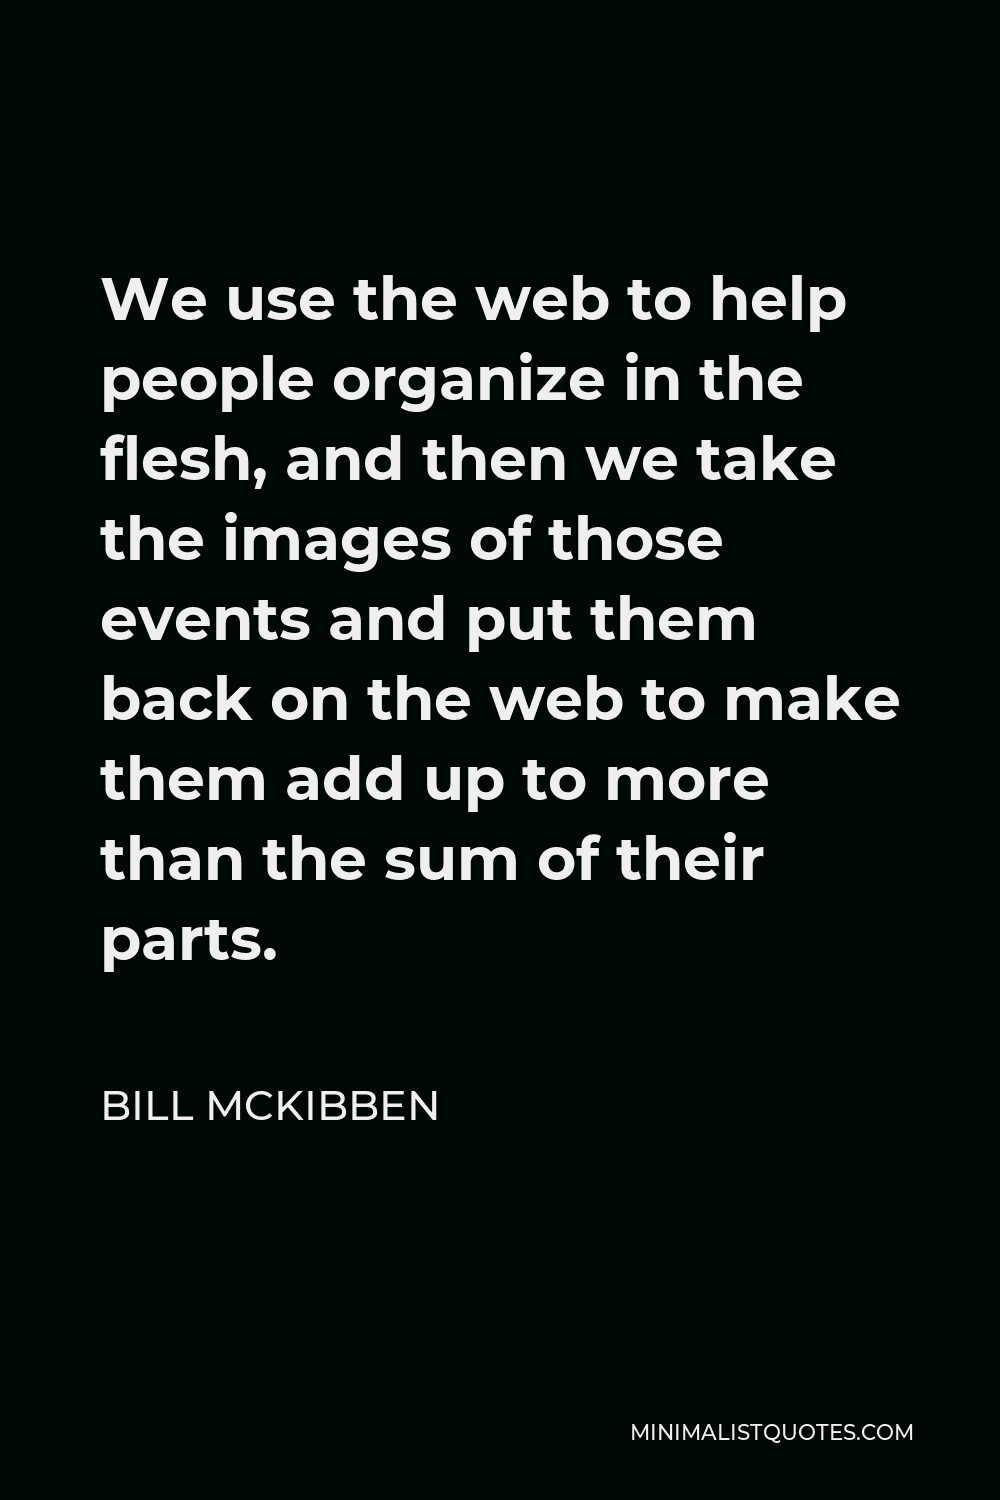 Bill McKibben Quote - We use the web to help people organize in the flesh, and then we take the images of those events and put them back on the web to make them add up to more than the sum of their parts.